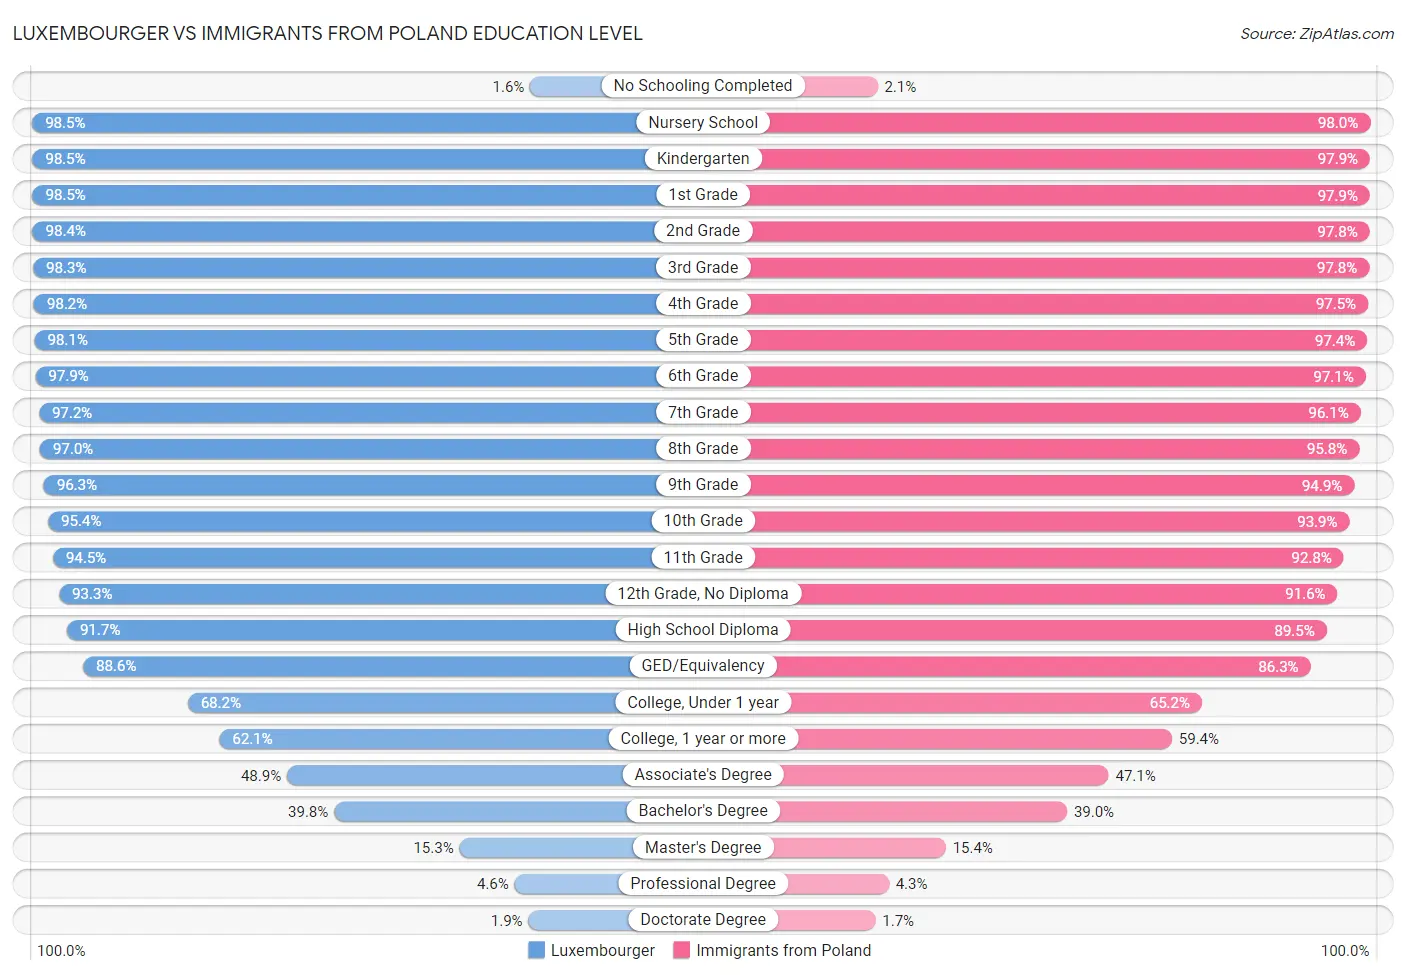 Luxembourger vs Immigrants from Poland Education Level